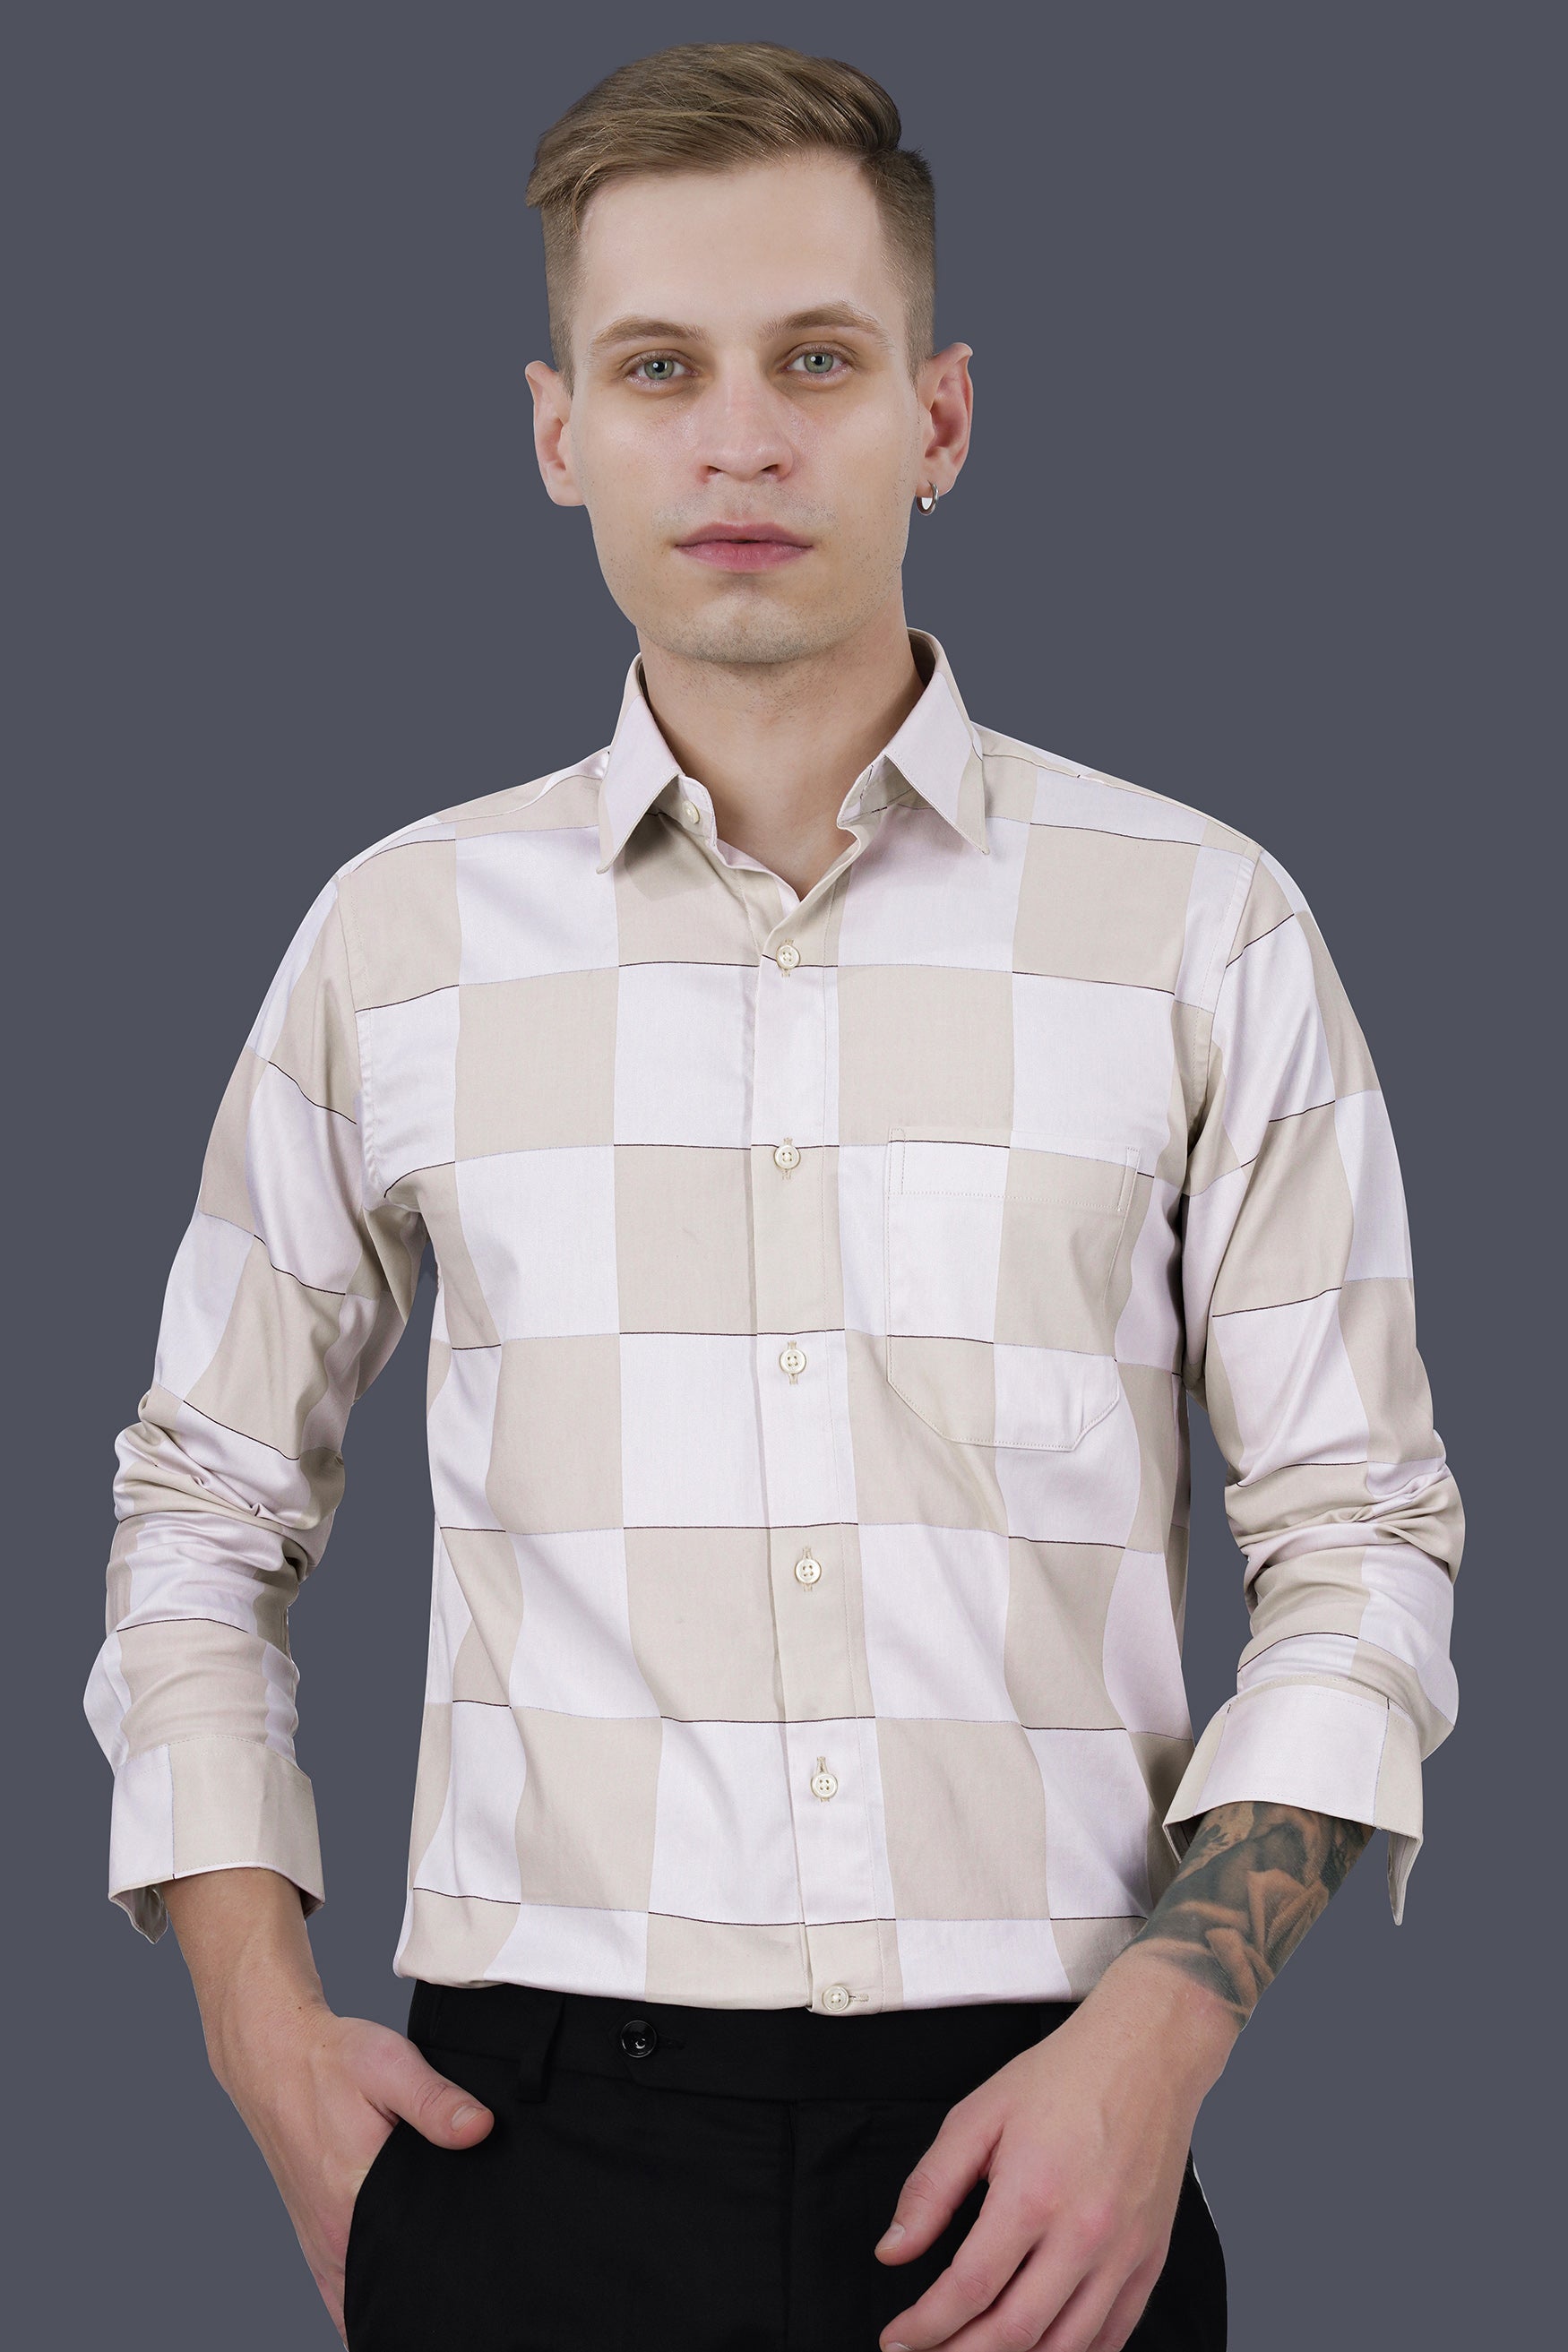 Timberwolf Cream and Quill Gray Checked Subtle Sheen Super Soft Premium Cotton Shirt 11748-38, 11748-H-38, 11748-39, 11748-H-39, 11748-40, 11748-H-40, 11748-42, 11748-H-42, 11748-44, 11748-H-44, 11748-46, 11748-H-46, 11748-48, 11748-H-48, 11748-50, 11748-H-50, 11748-52, 11748-H-52